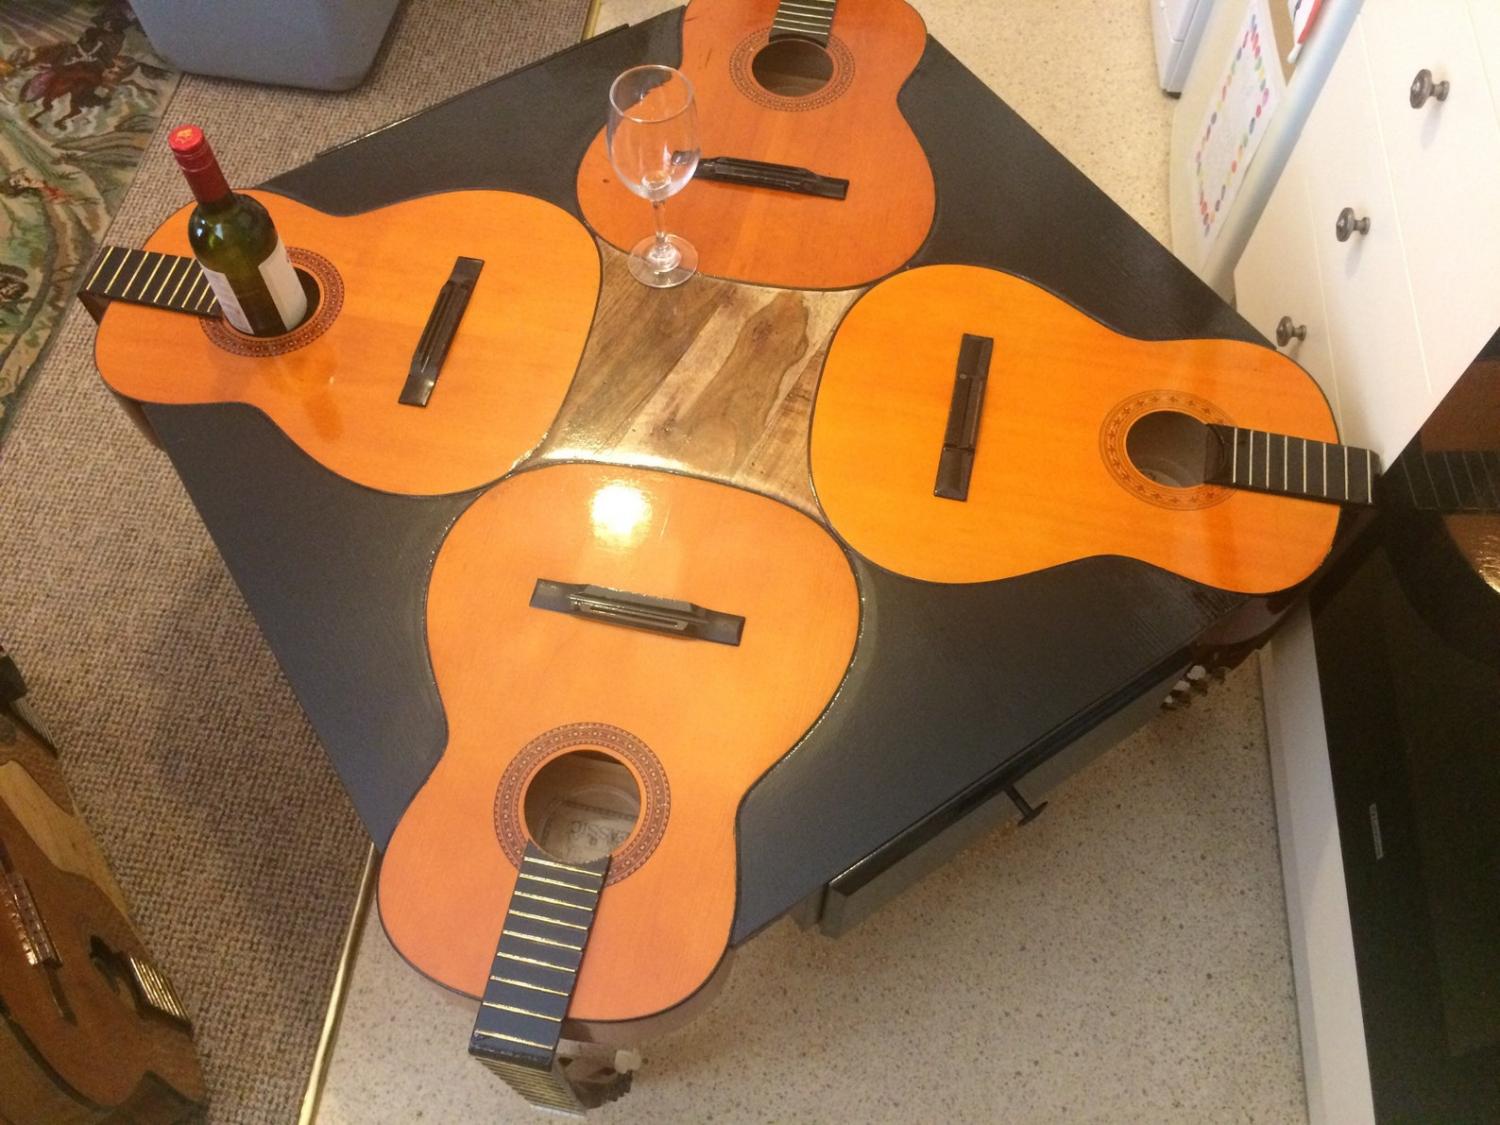 Guitar Coffee Table Made With 4 Real Guitars